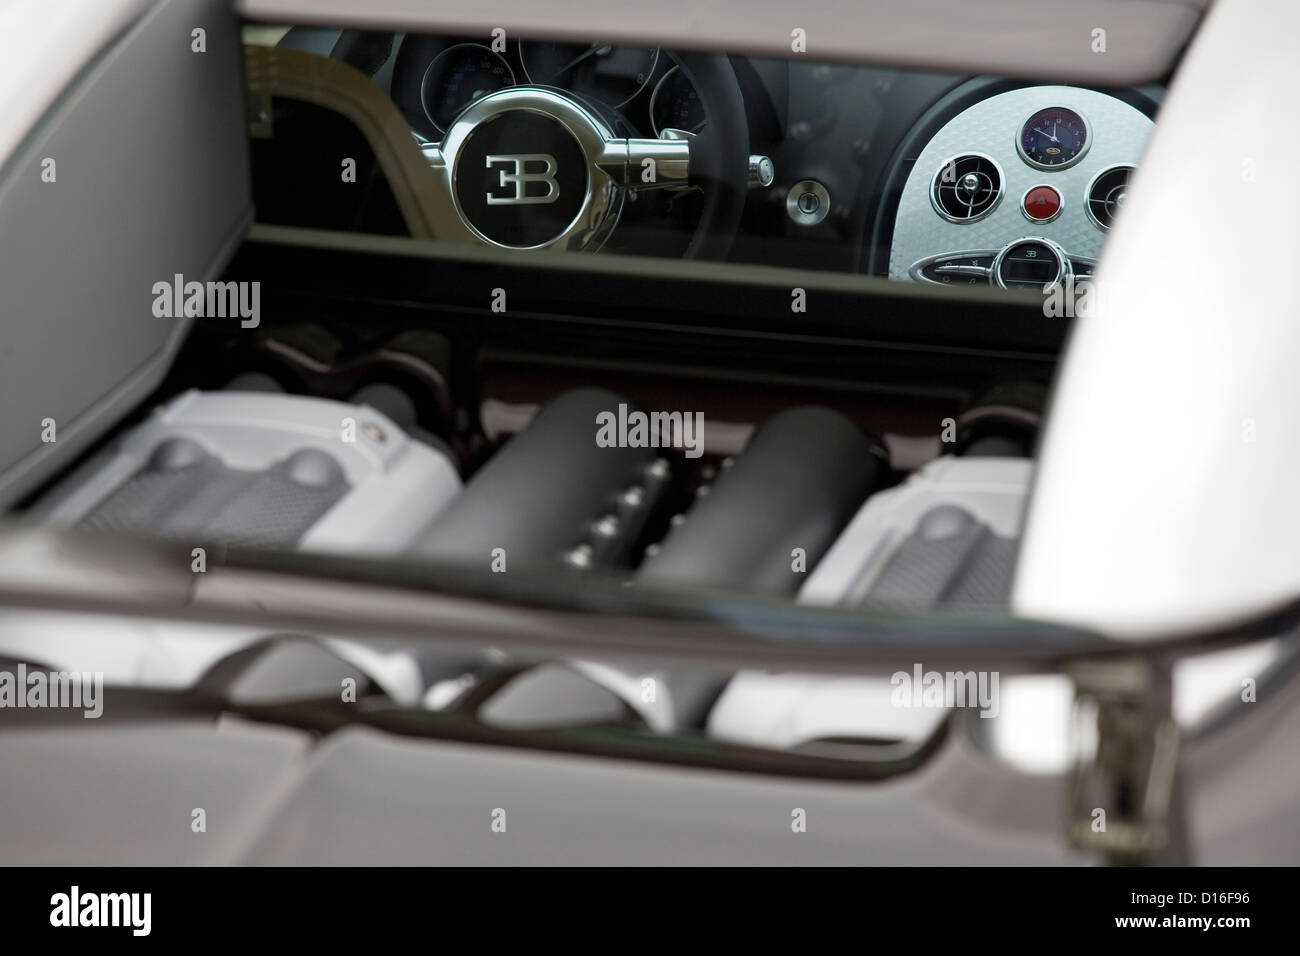 A view of the rear and interior of a Bugatti Veyron parked at a classic car show. Stock Photo